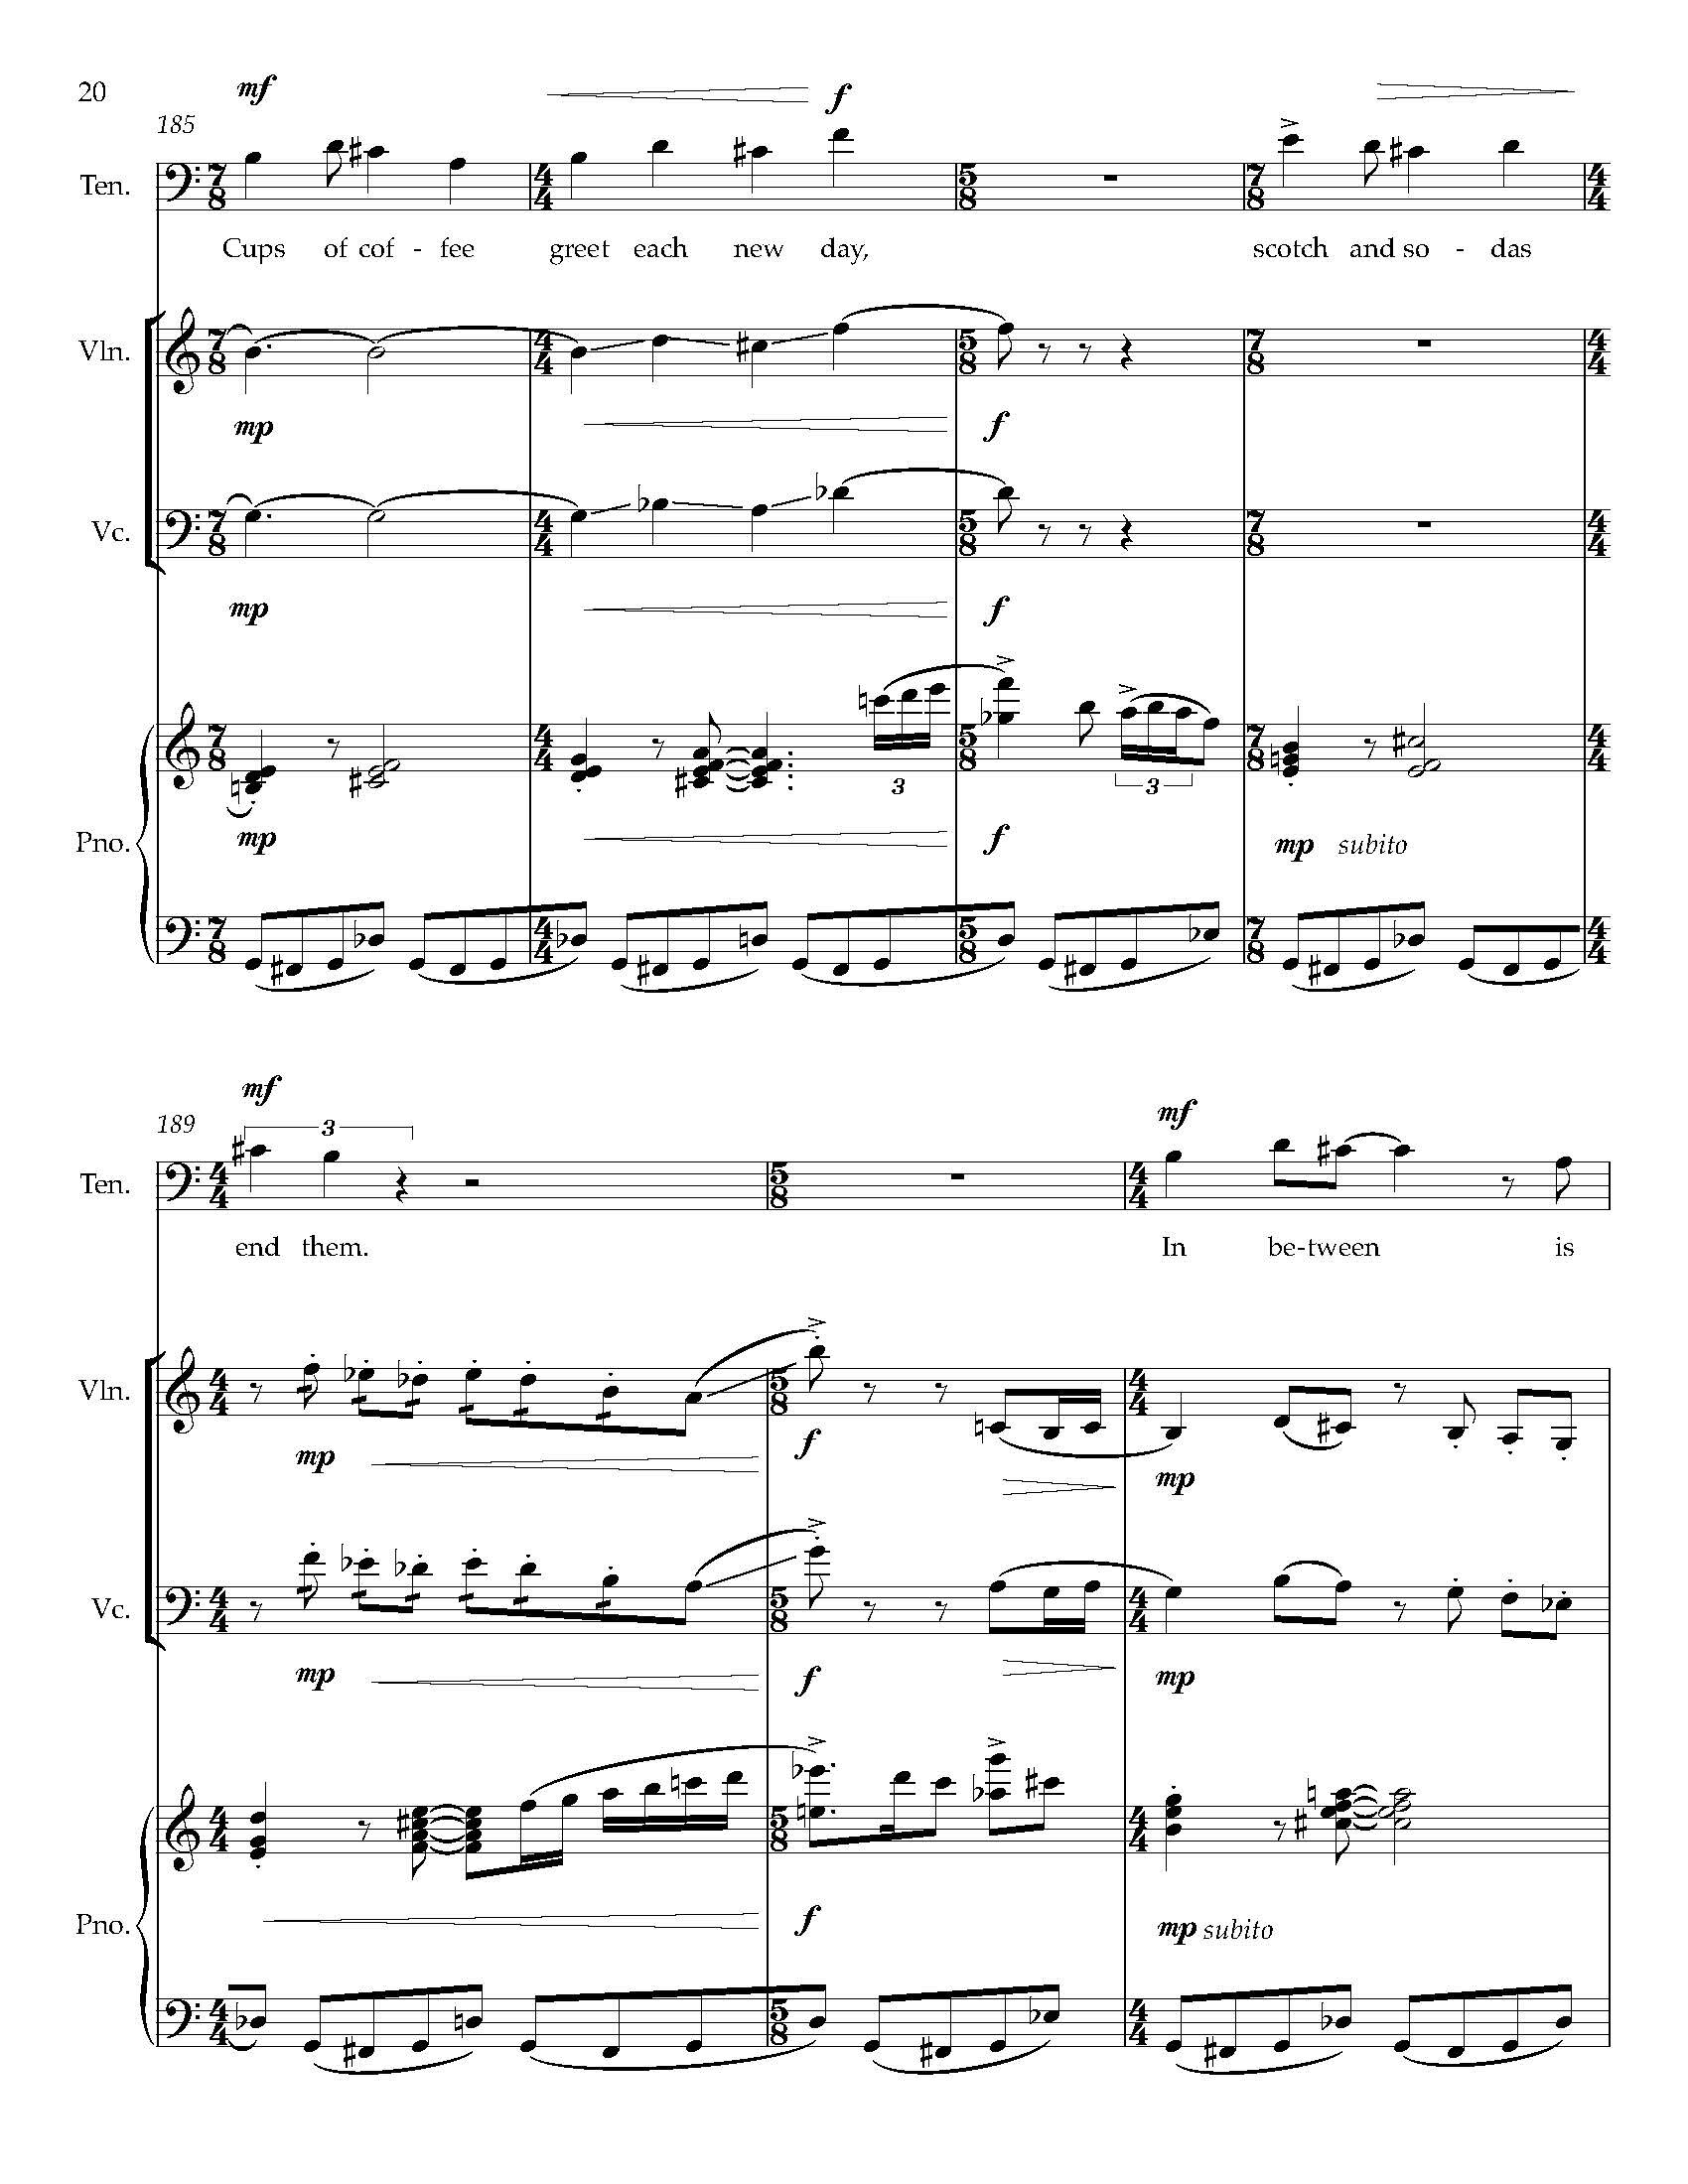 Gursky Songs - Complete Score_Page_28.jpg